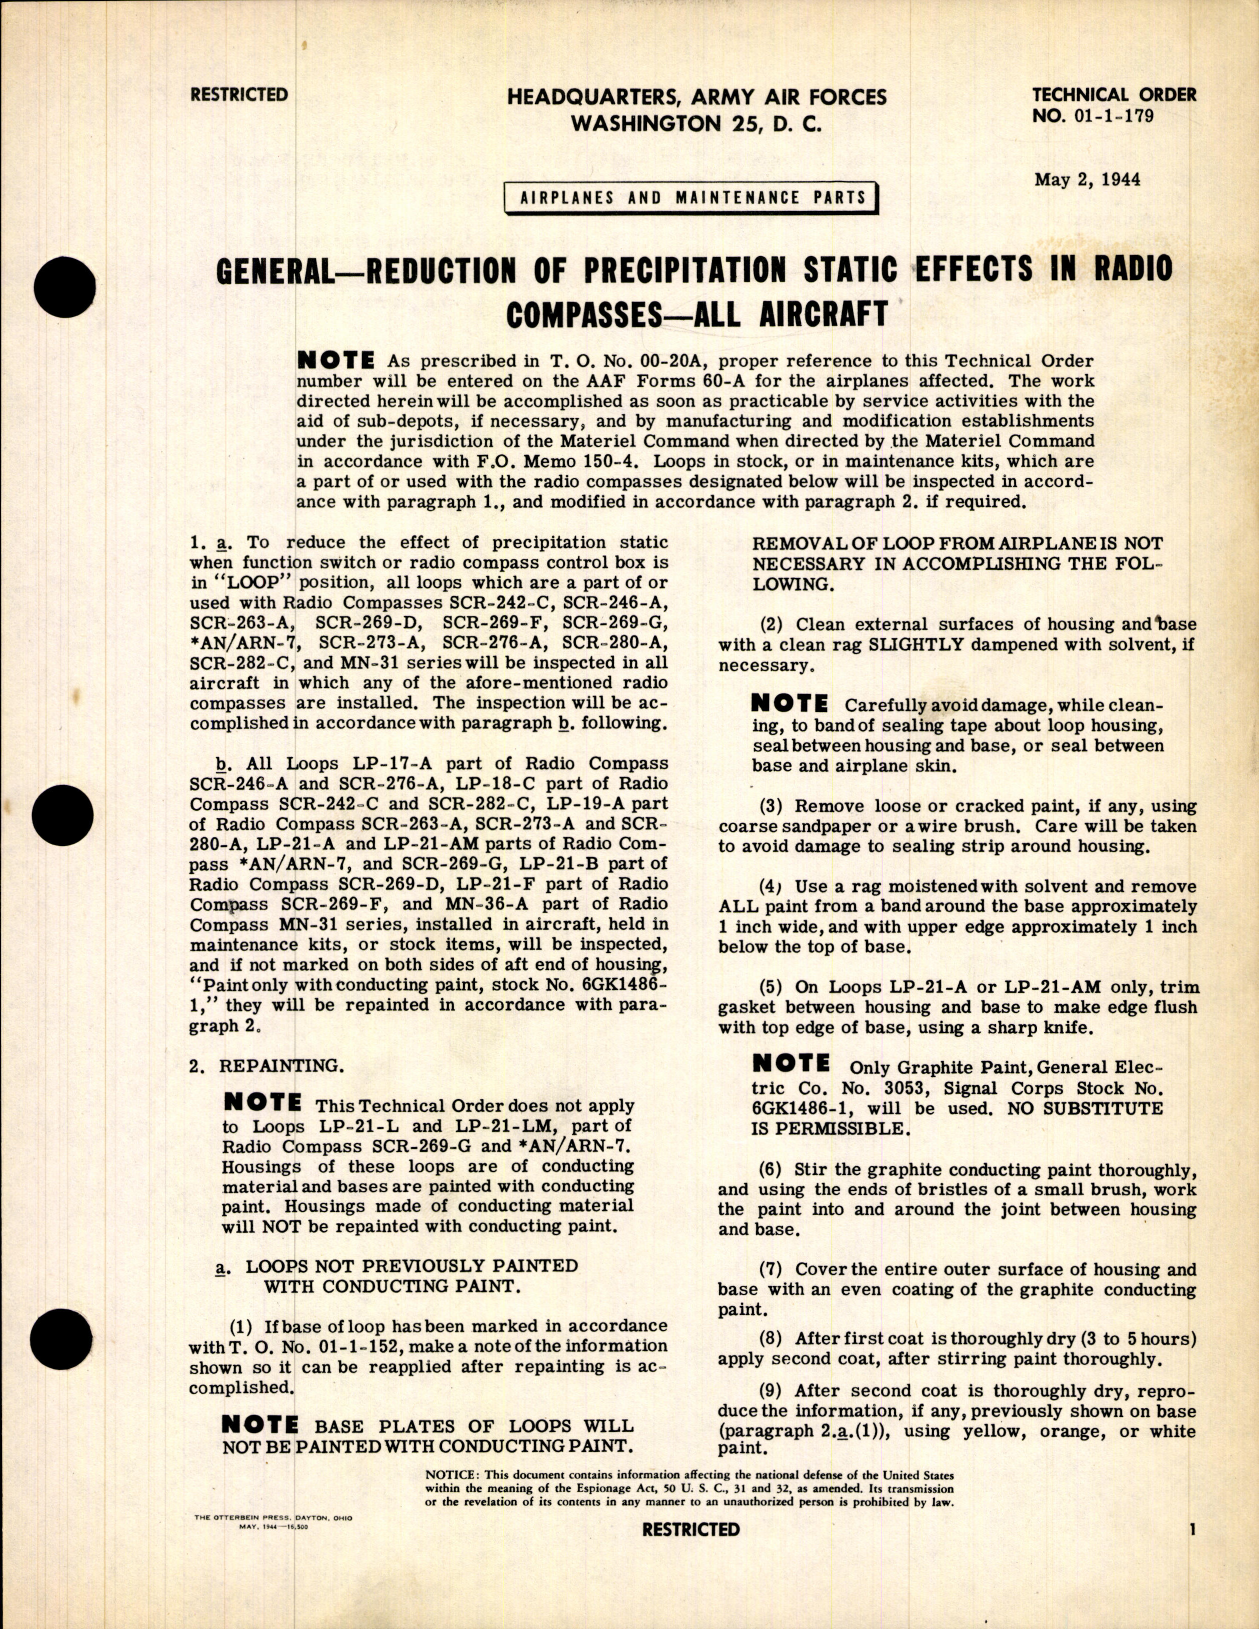 Sample page 1 from AirCorps Library document: Reduction of Precipitation Static Effects in Radio Compasses for All Aircraft